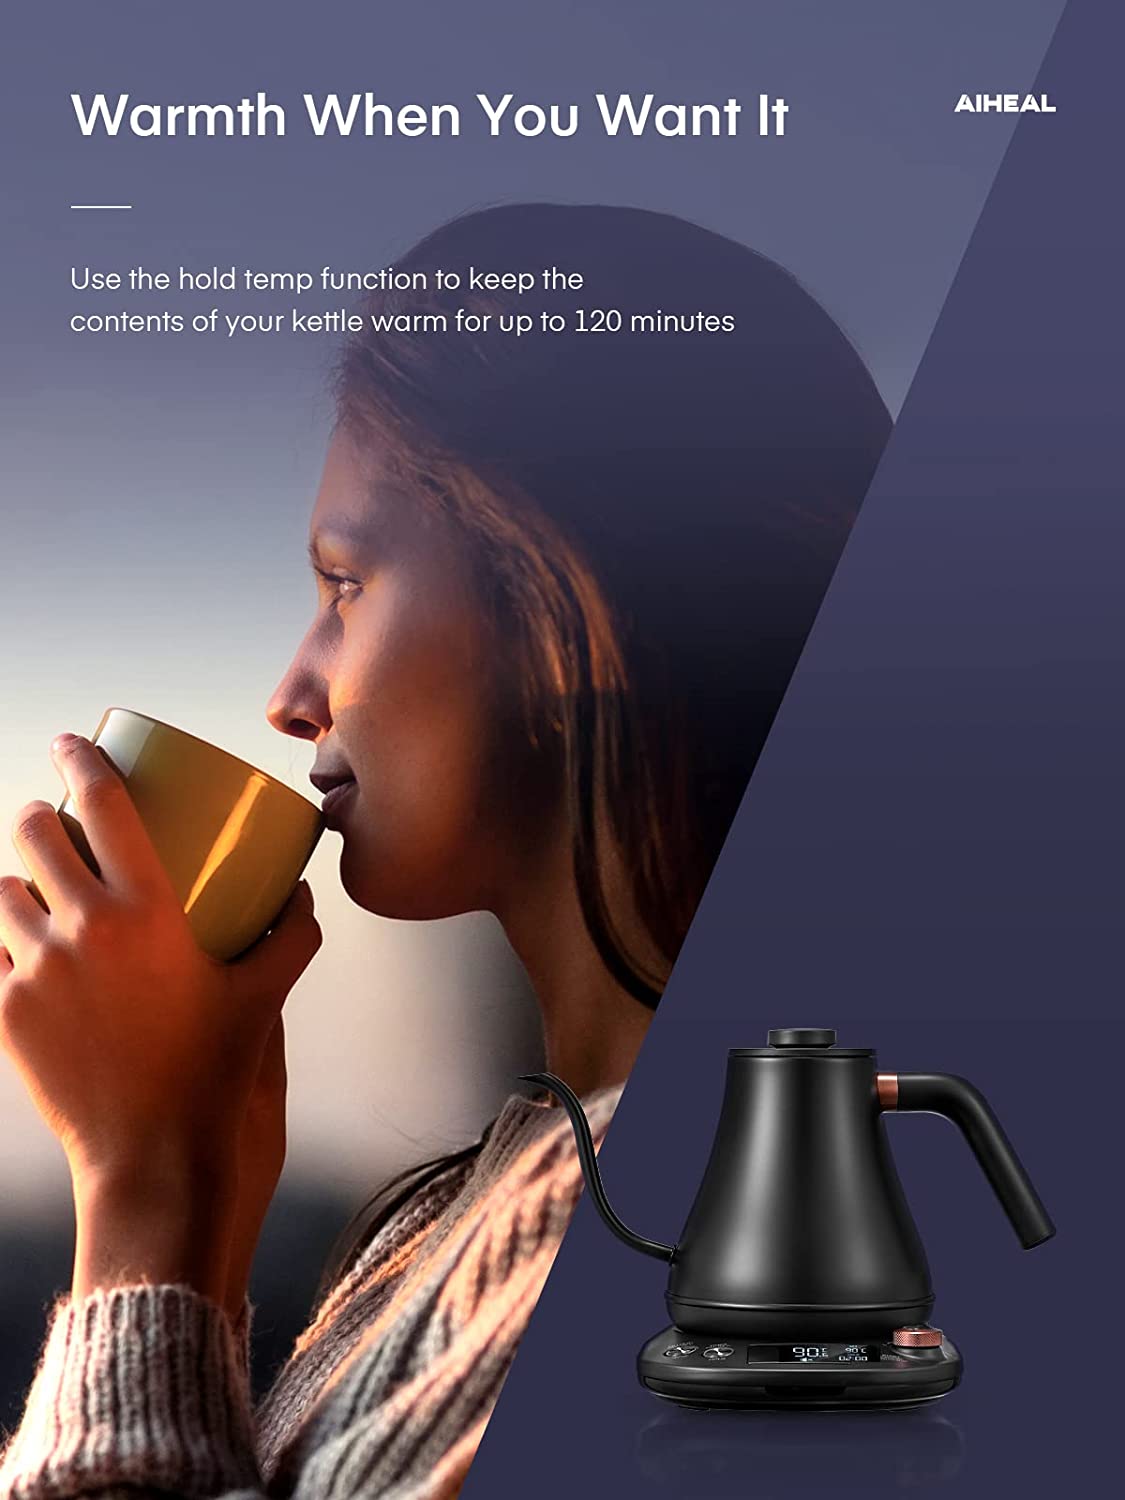 aiheal tea kettle, Built-in up-to-date advanced thermostat and 2.0-inch LCD display to show the real-time temperature and set temperature, and other information like hold time, mute mode, and heating status. A single glimpse will give you all the important parameters.